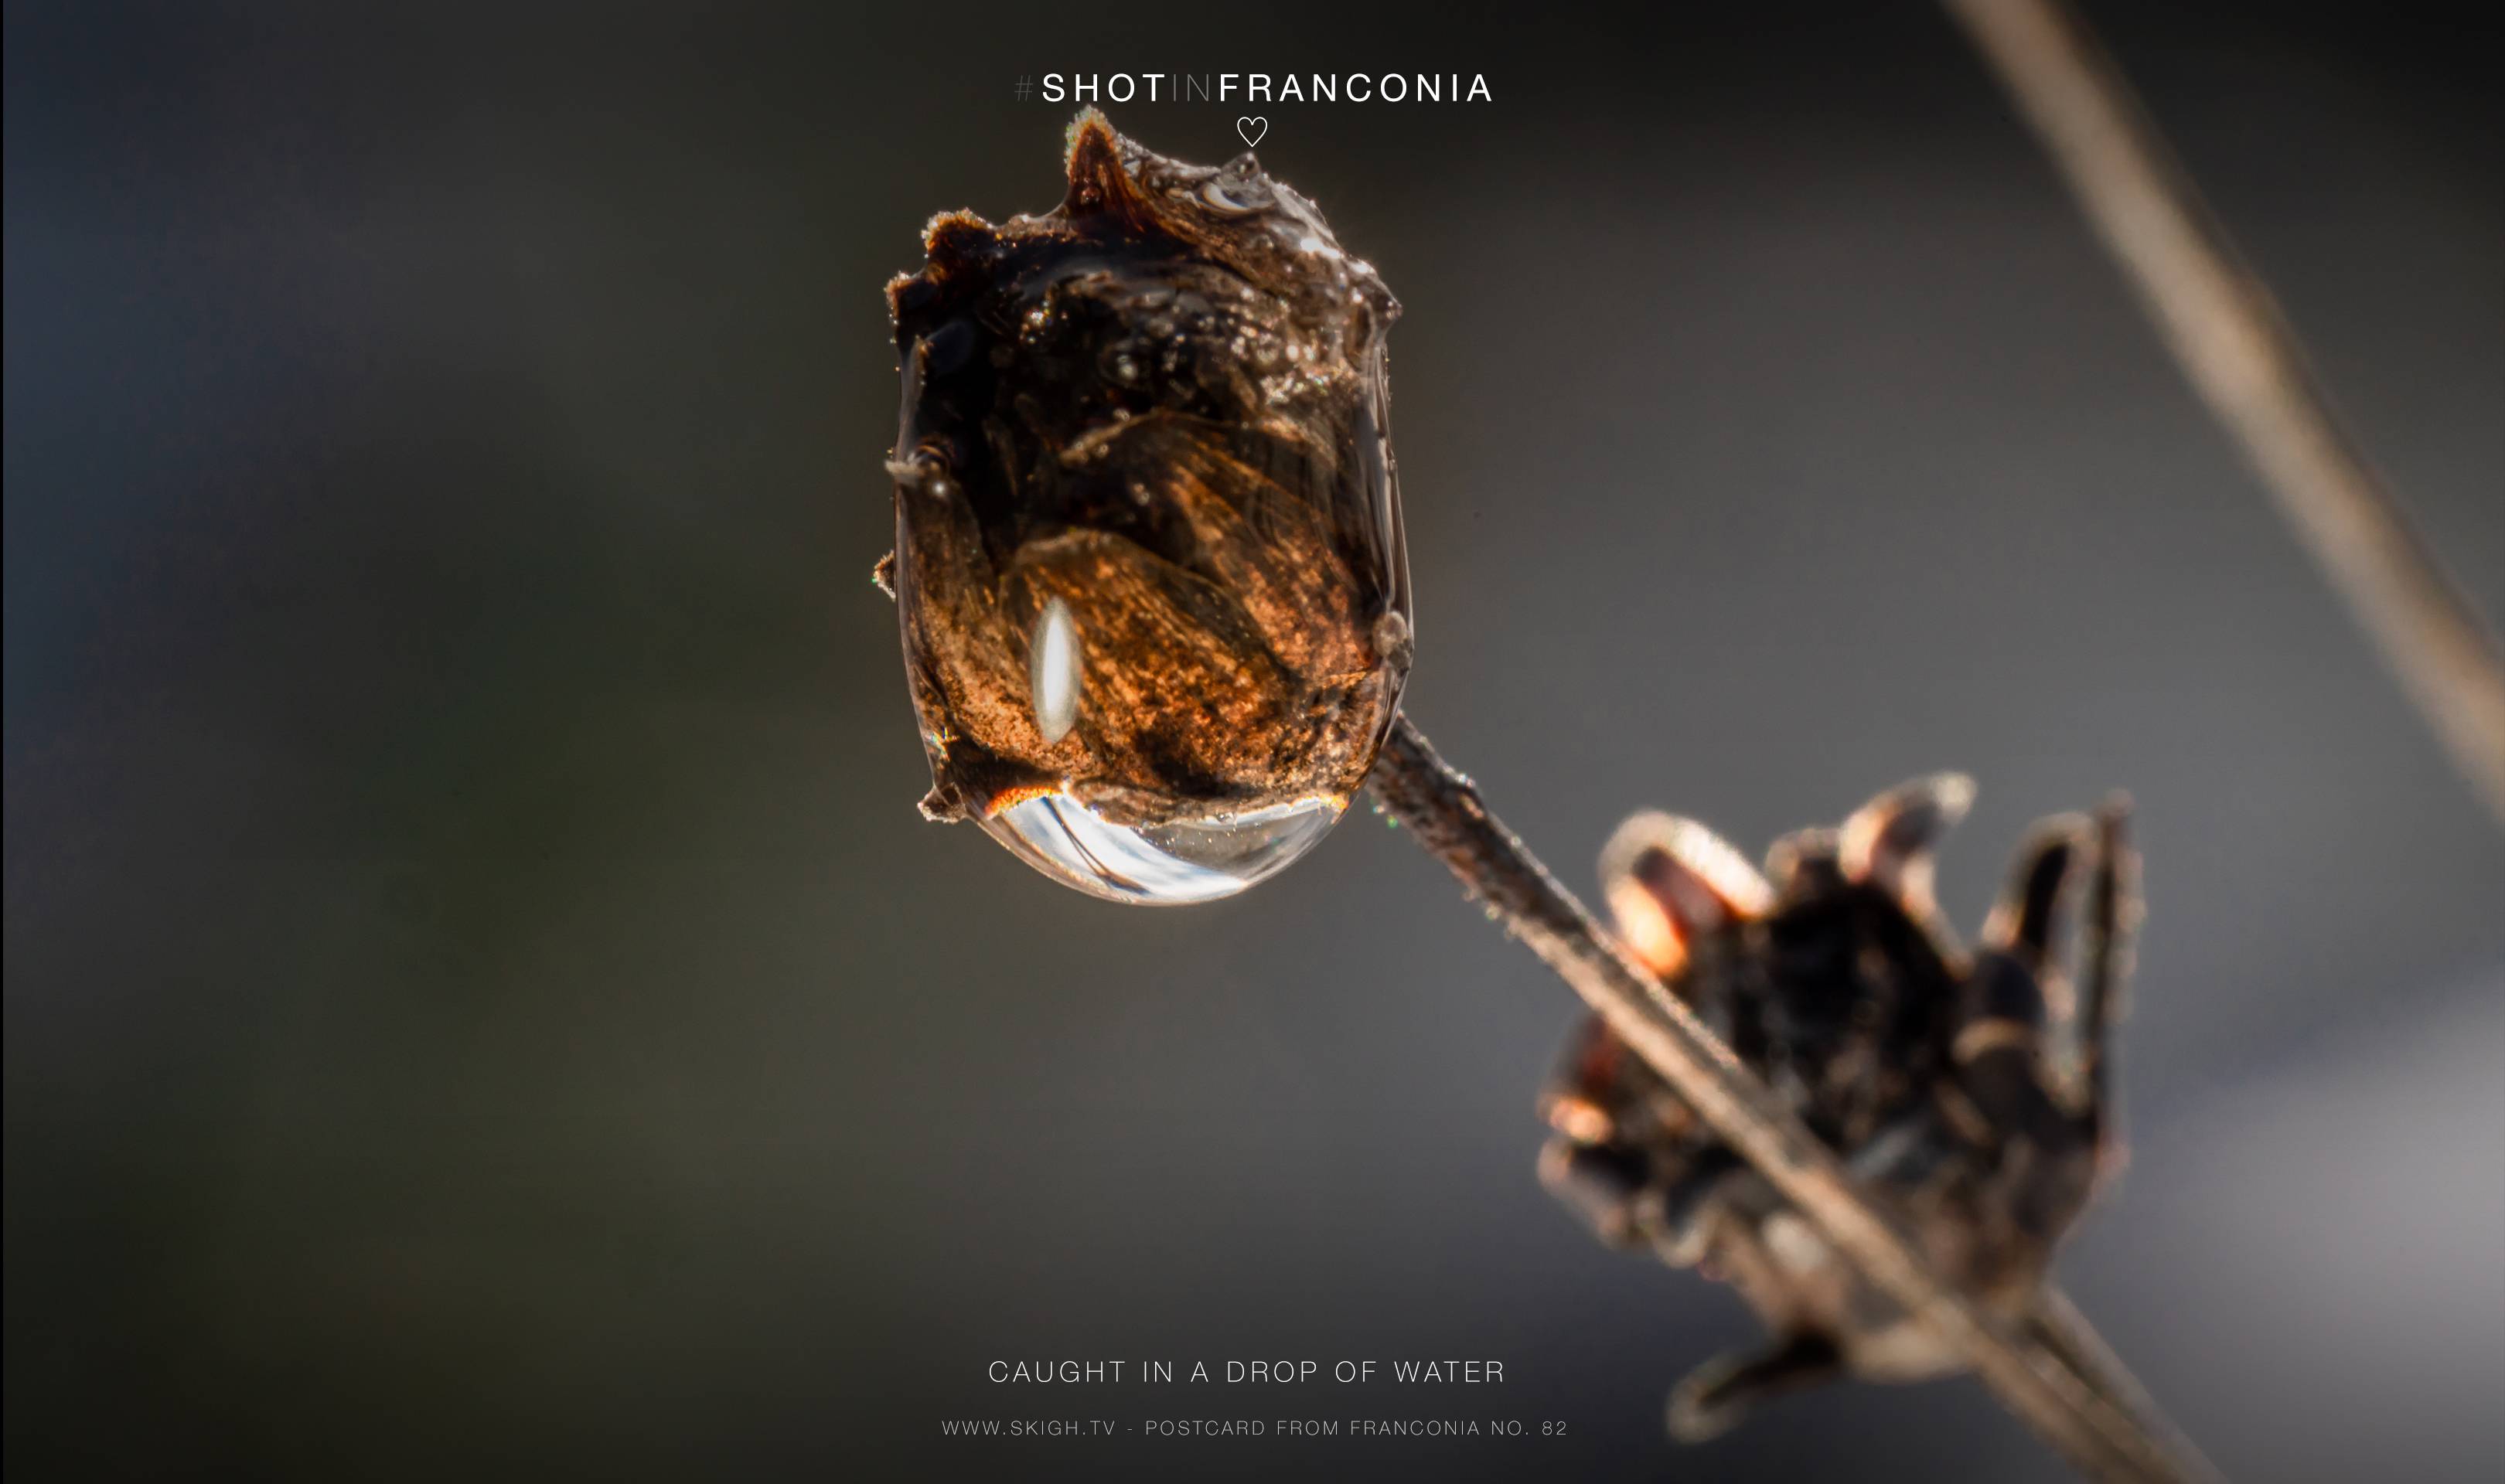 Caught in a drop of water